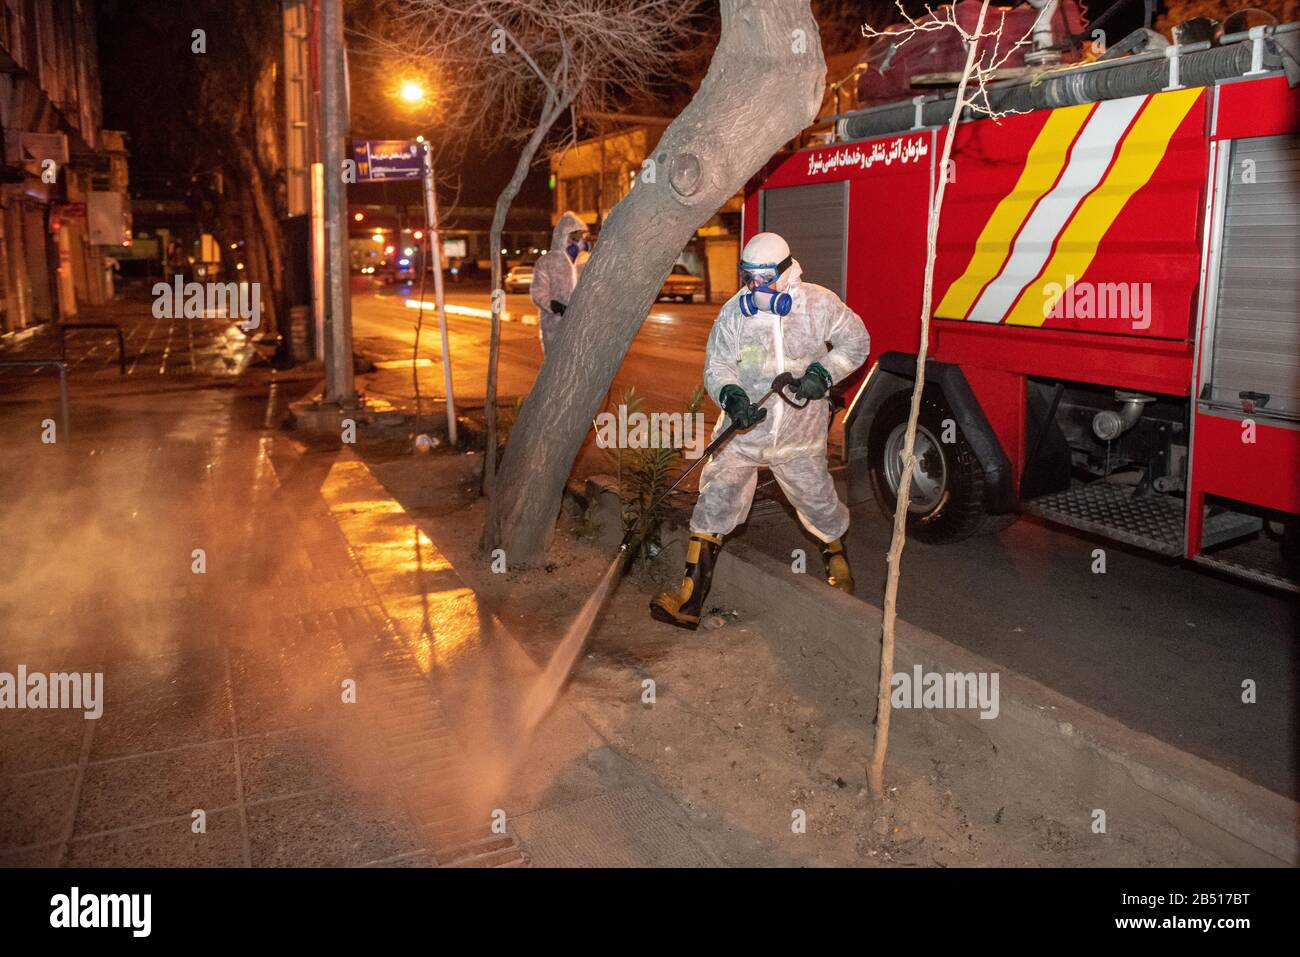 Disinfection of public places and thoroughfares in Shiraz, Lotfali-Khan-Zand St. is underway with the aim of preventing and combating outbreak of Coronavirus(COVID-19). For this purpose, experts of health ministry have cooperated with the provincial fire department and disinfect the city in late hours of the night using machinery and mobile pumps. Iran, Fars province, Shiraz city. Stock Photo